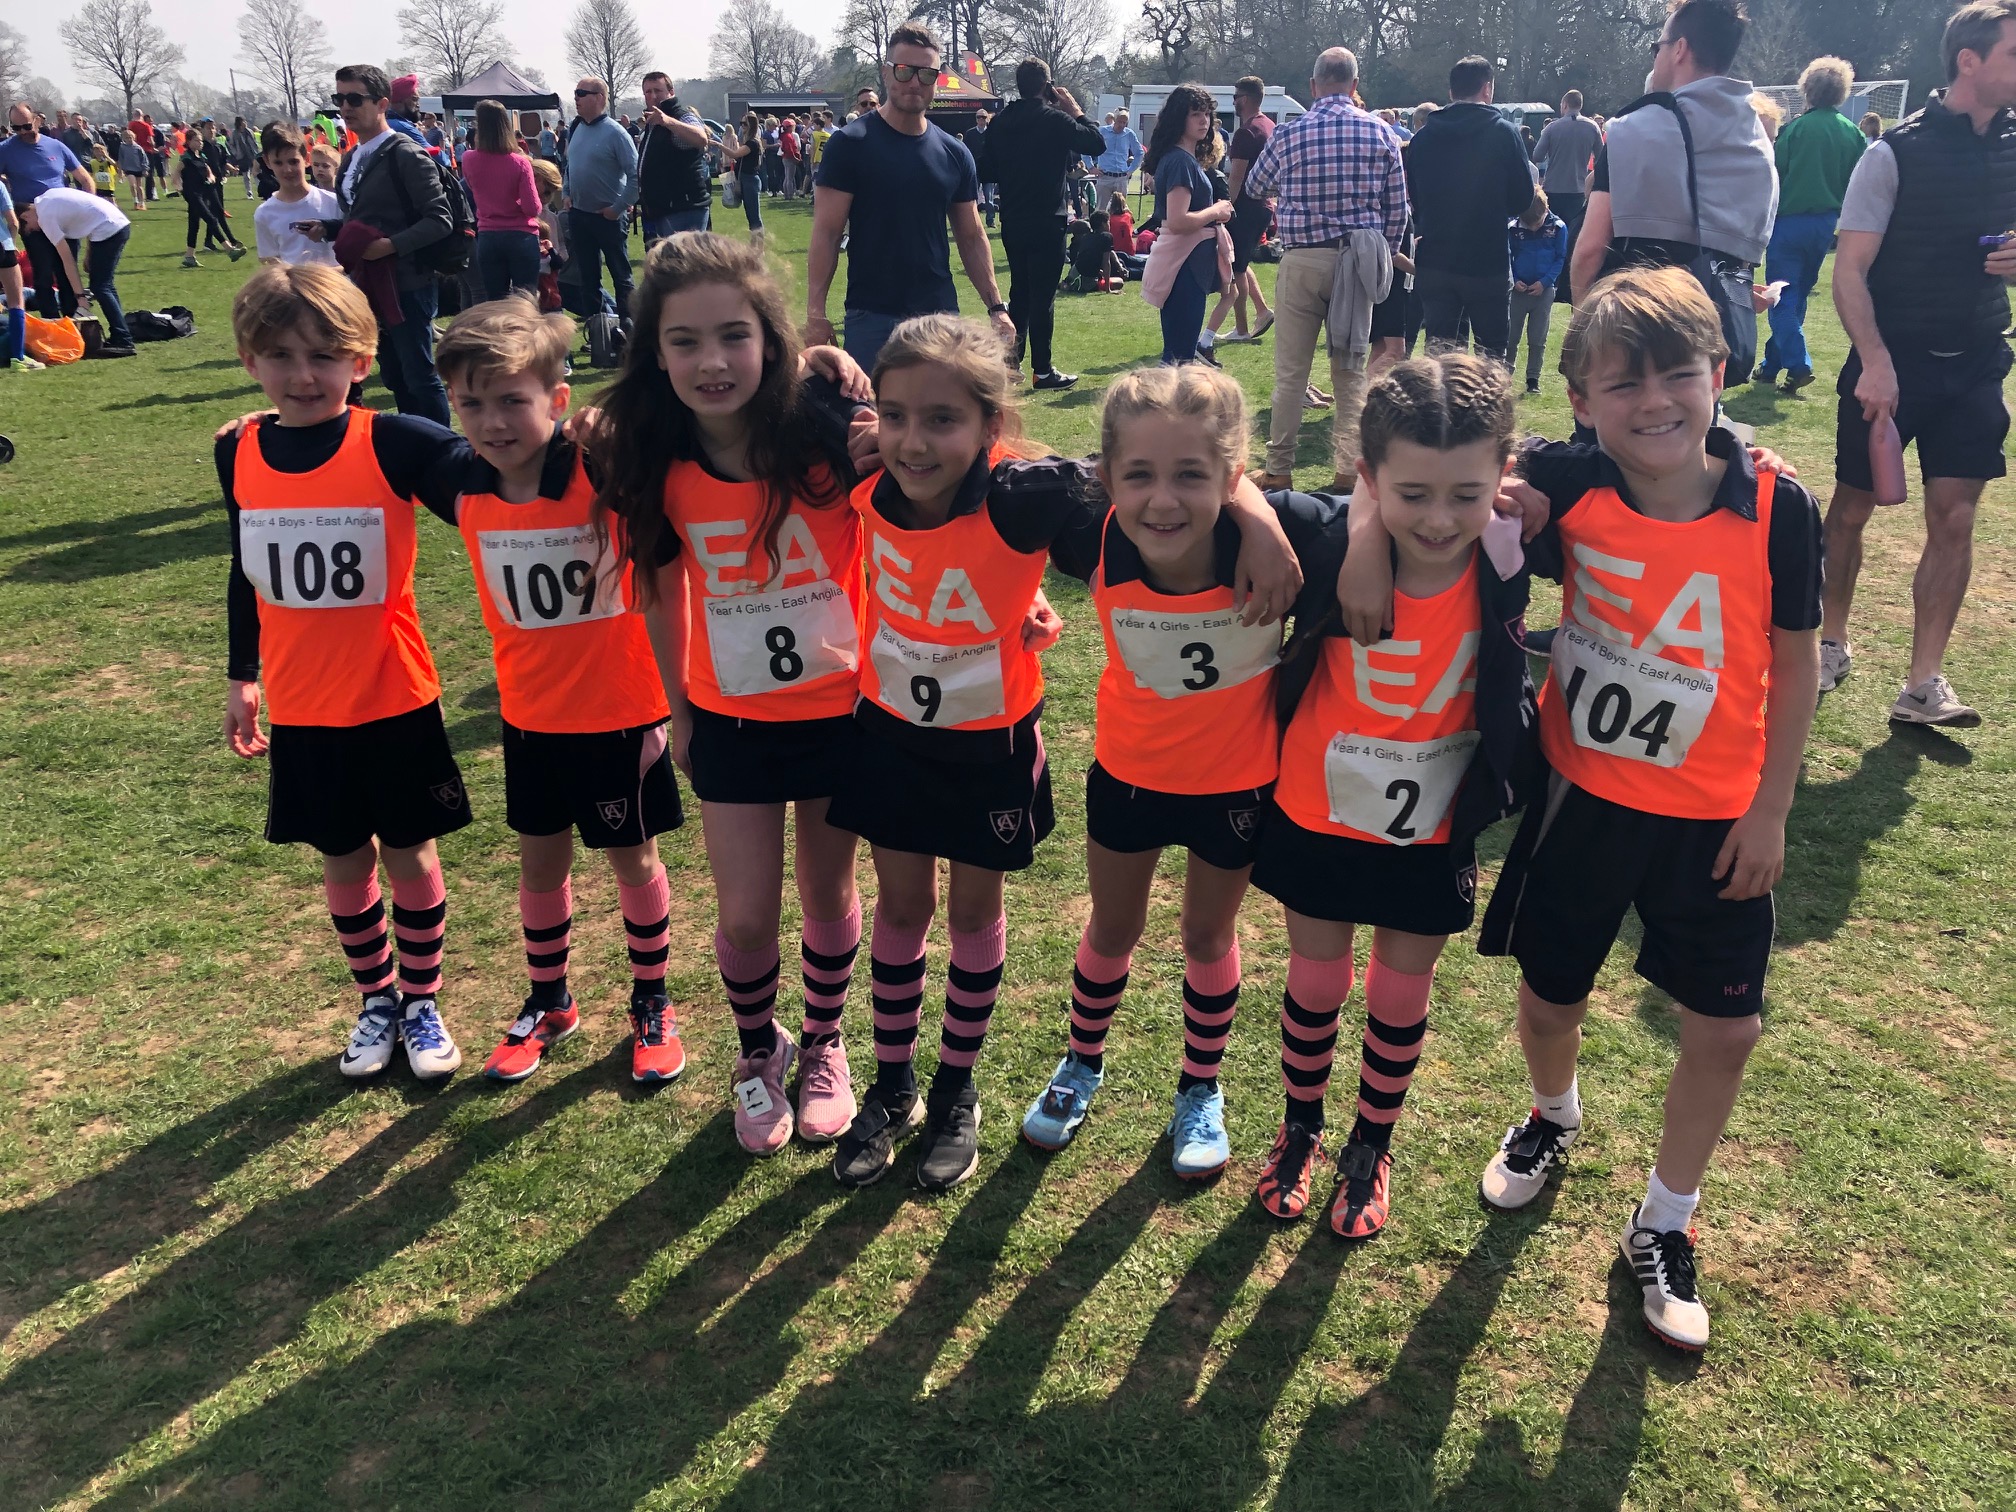 National Cross Country Champions 2019